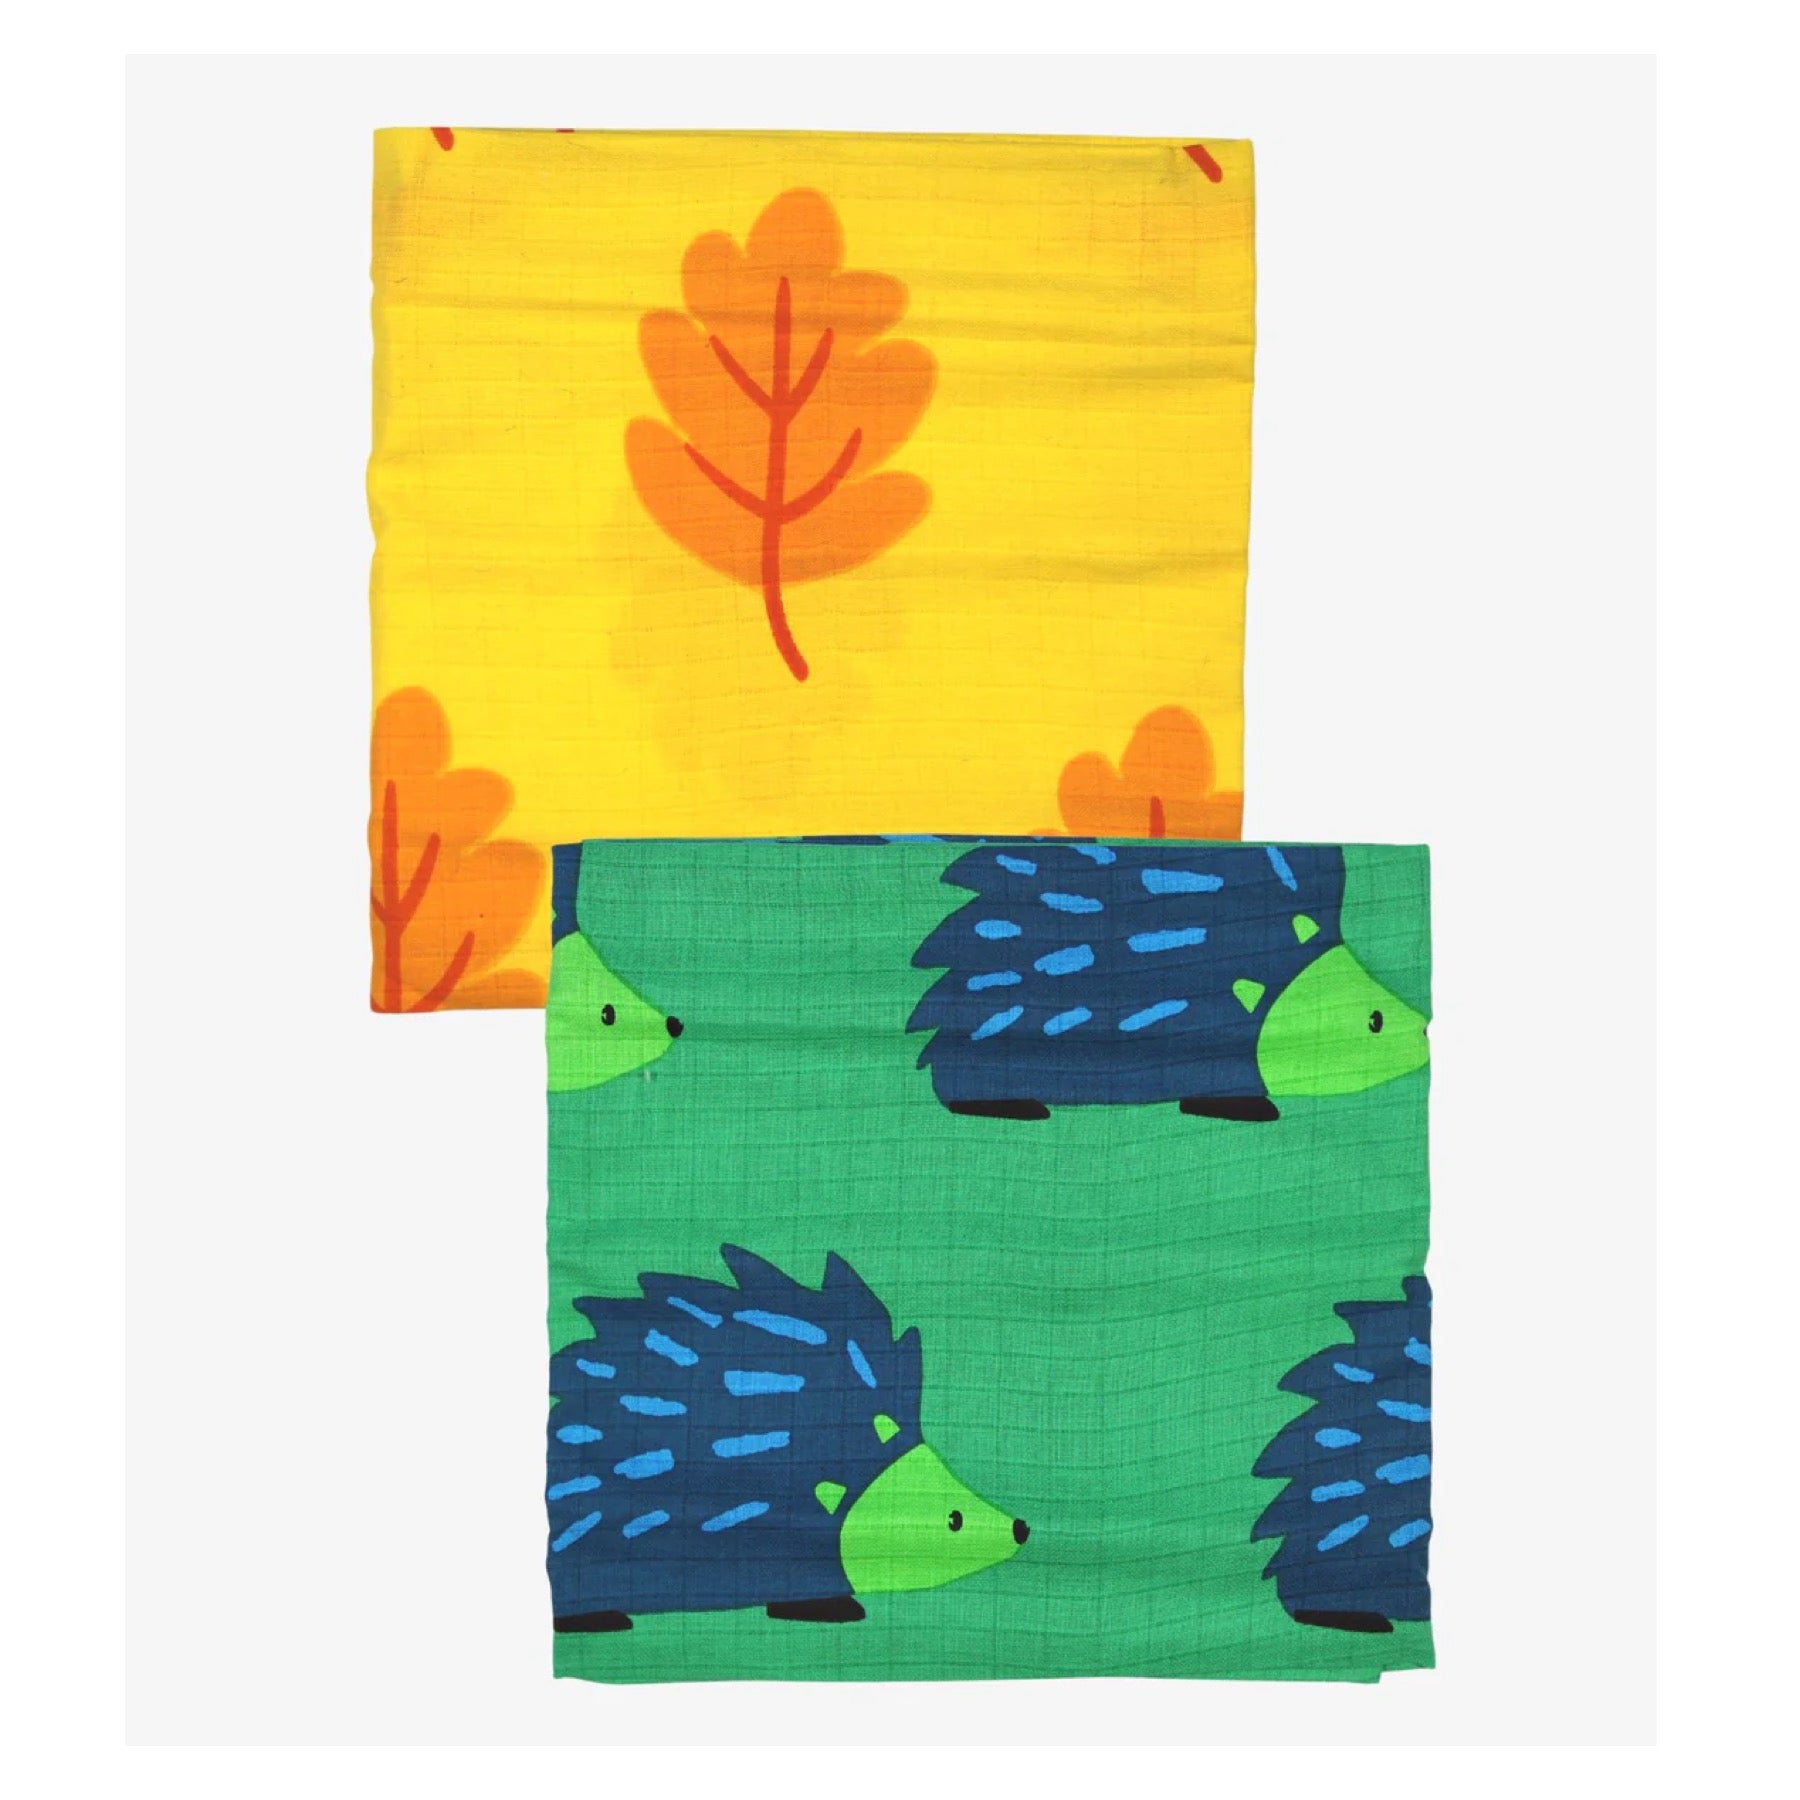 Toby Tiger Muslins (2 Pack) Autumn